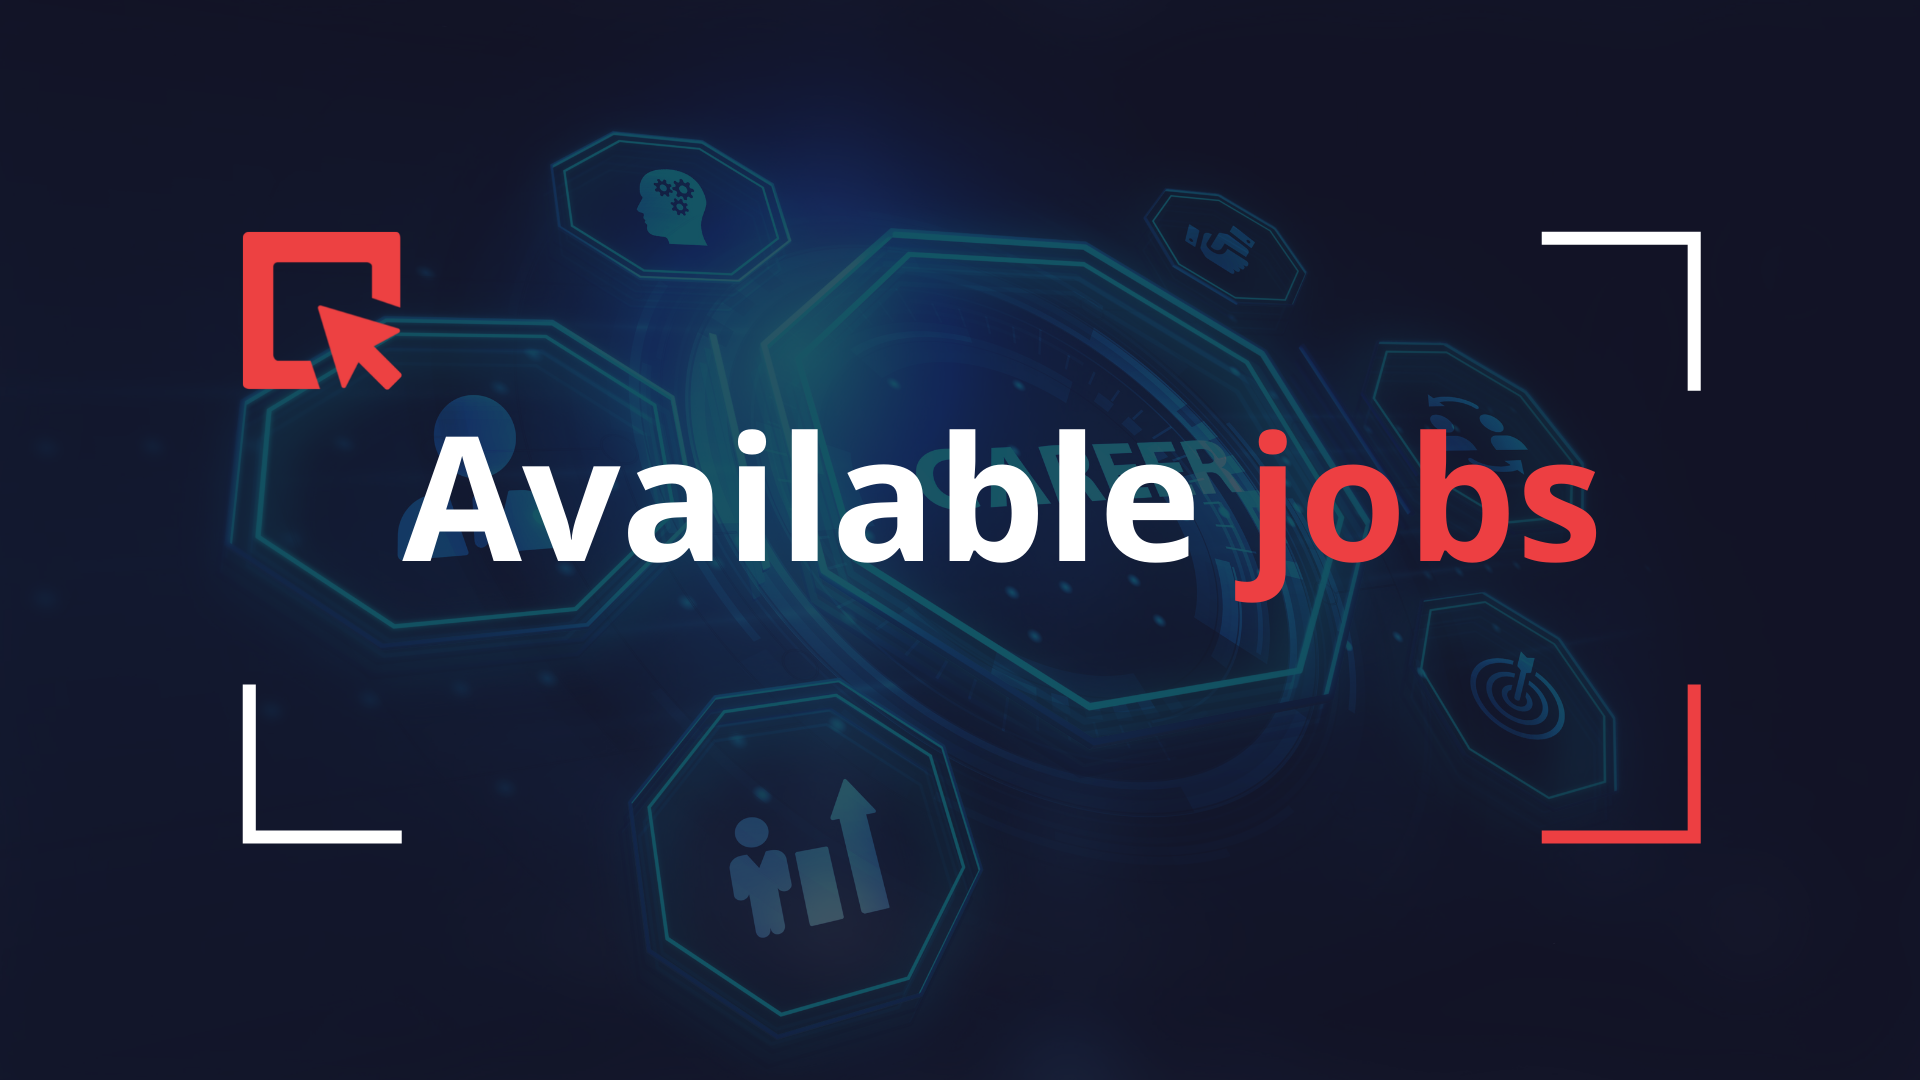 Roweb Development on X: #RowebTeam We are looking for a Backend .Net  Developer to join our team remotely or from one of our offices (Bucharest,  Pitesti, Craiova). If this sounds interesting, please